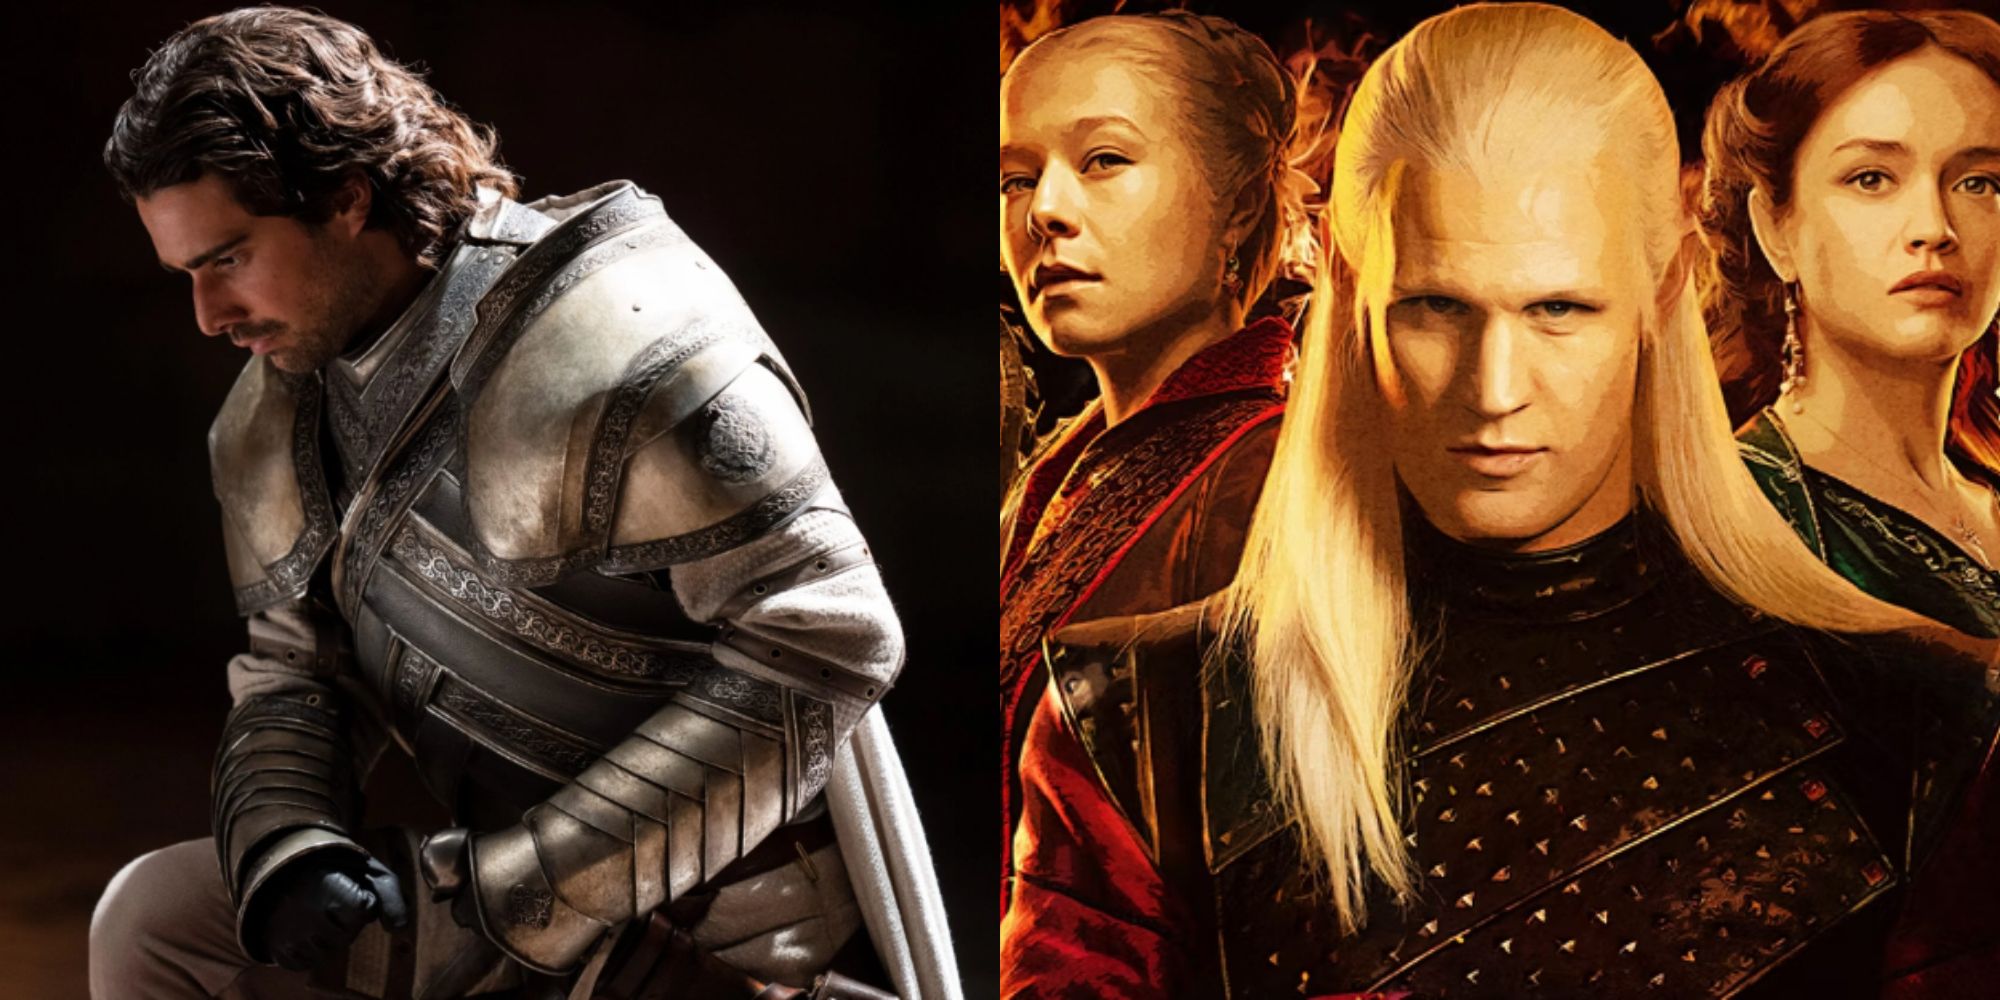 A split image of the cast of Daemon, Alicent, and Rhaenyra standing together and Ser Criston kneeling